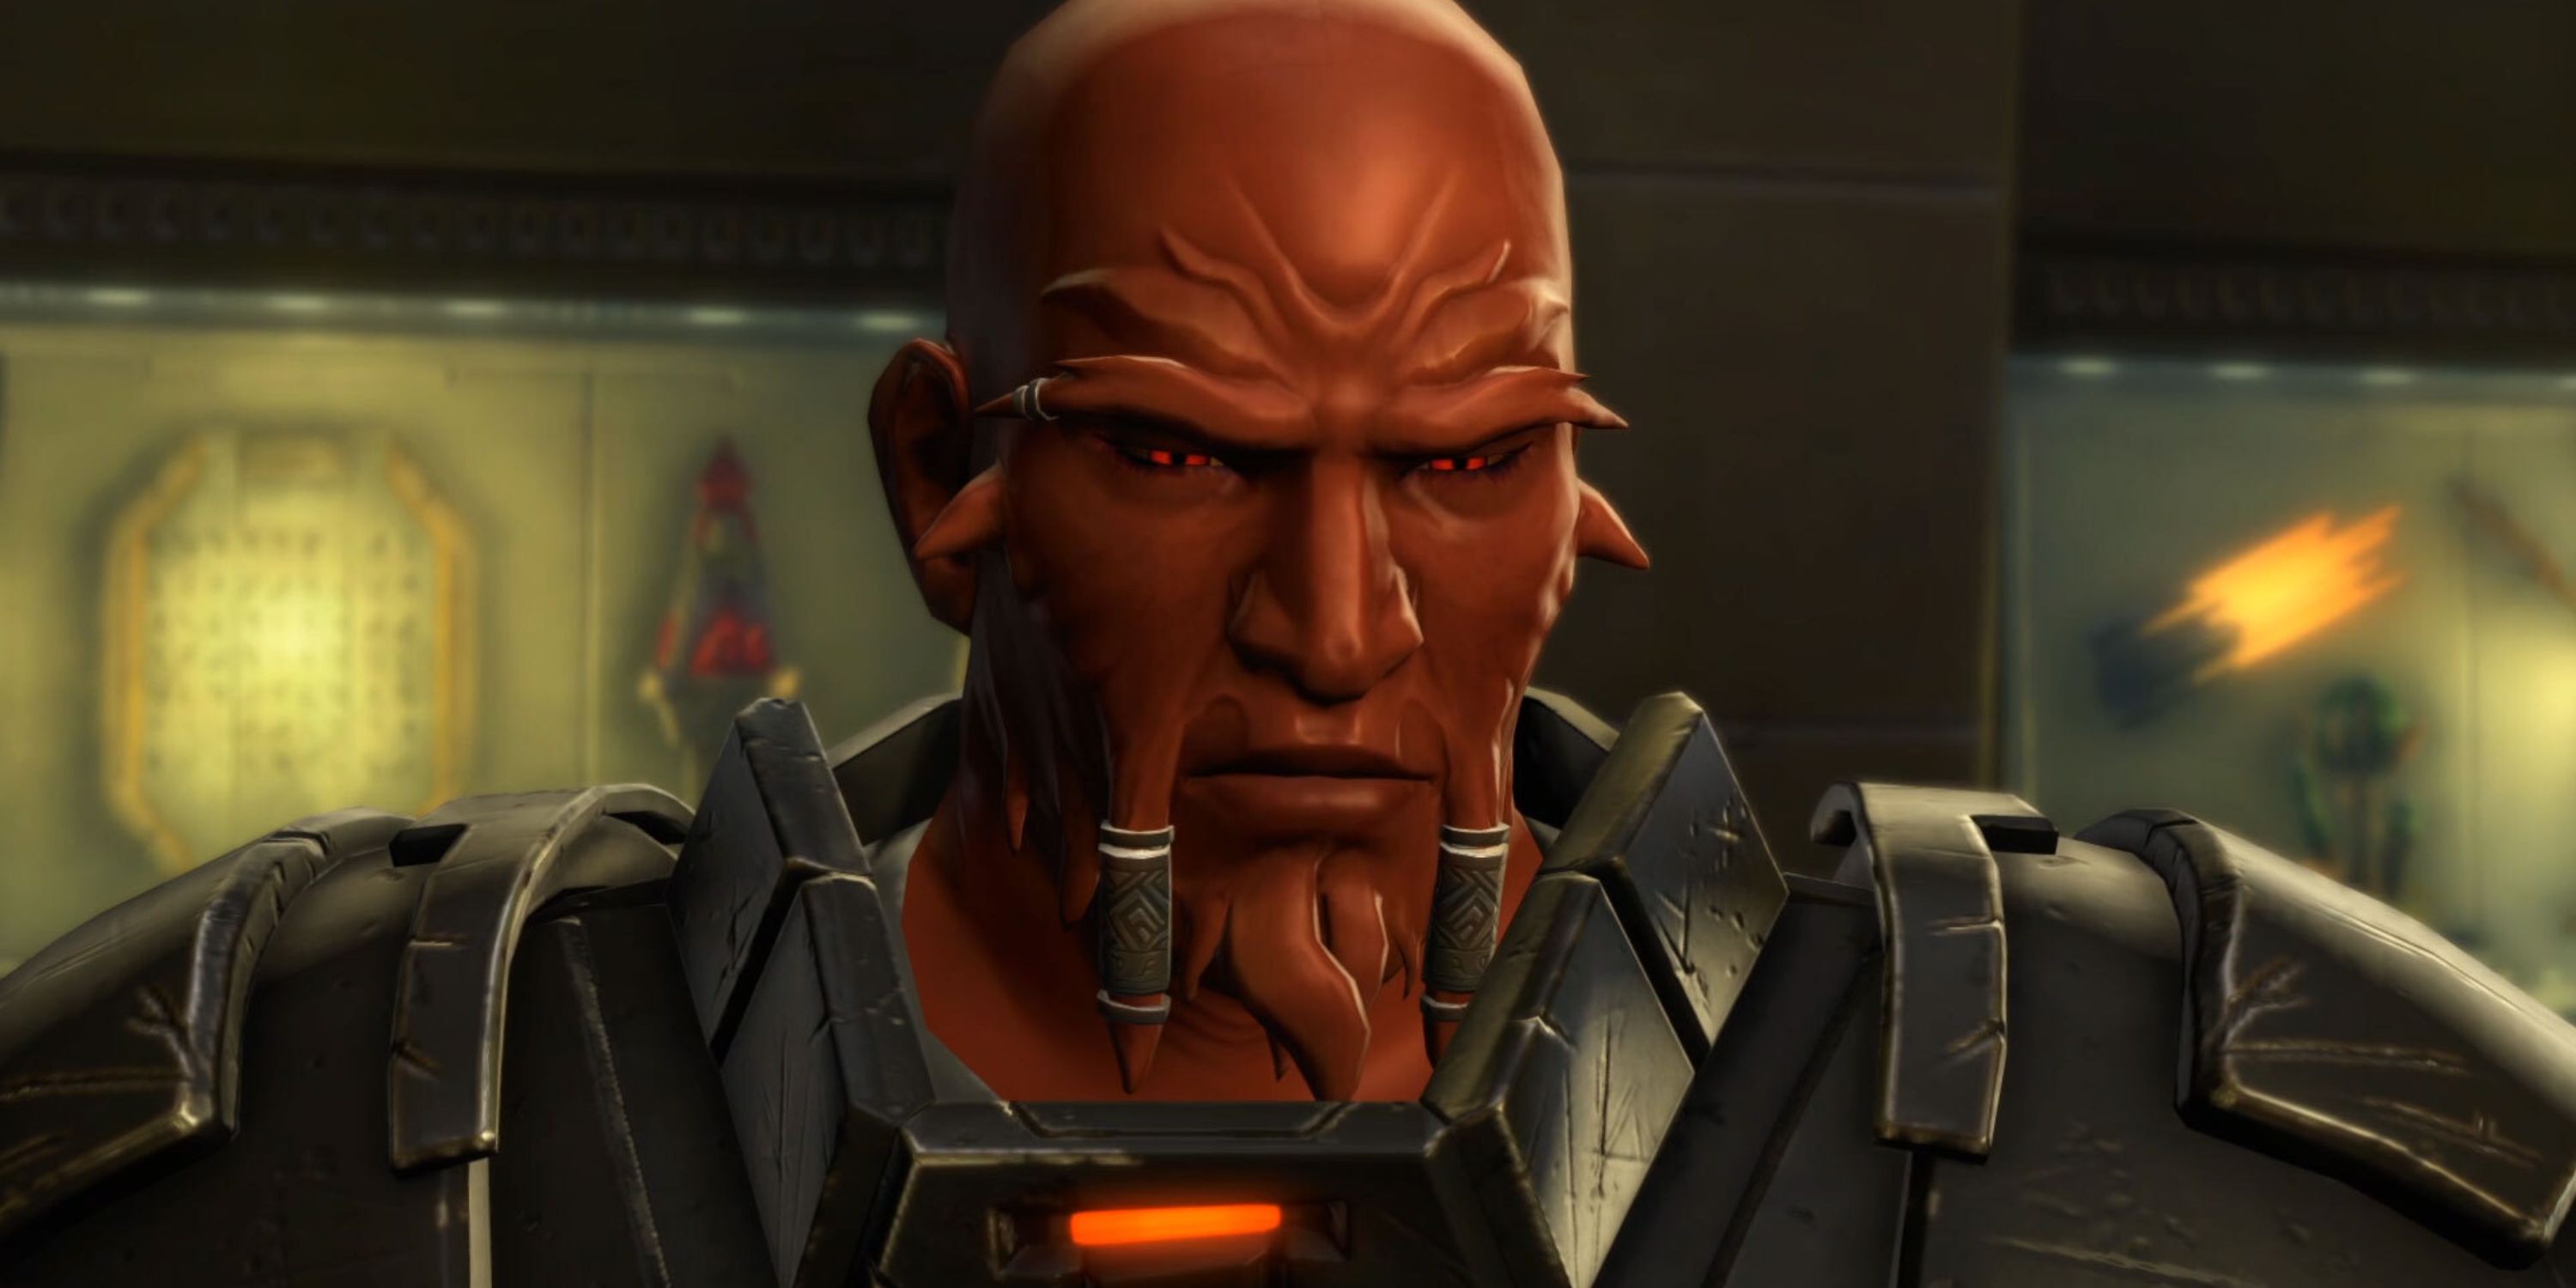 Lord Scourge, a companion from Star Wars: The Old Republic